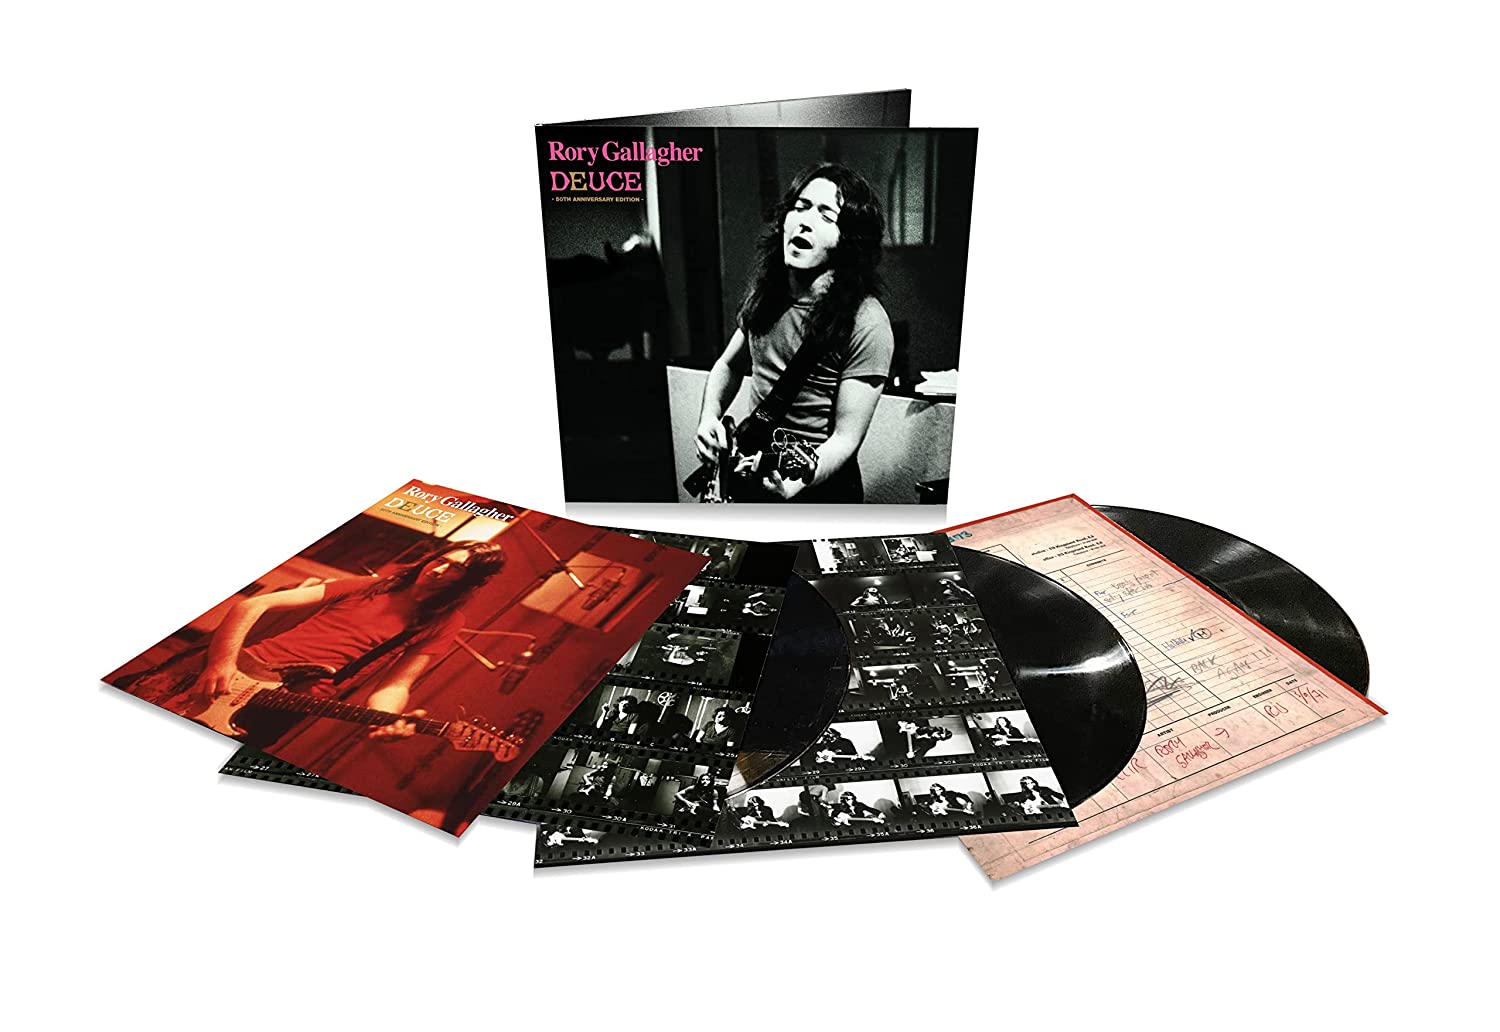 Deuce - 50th Anniversary Deluxe Edition